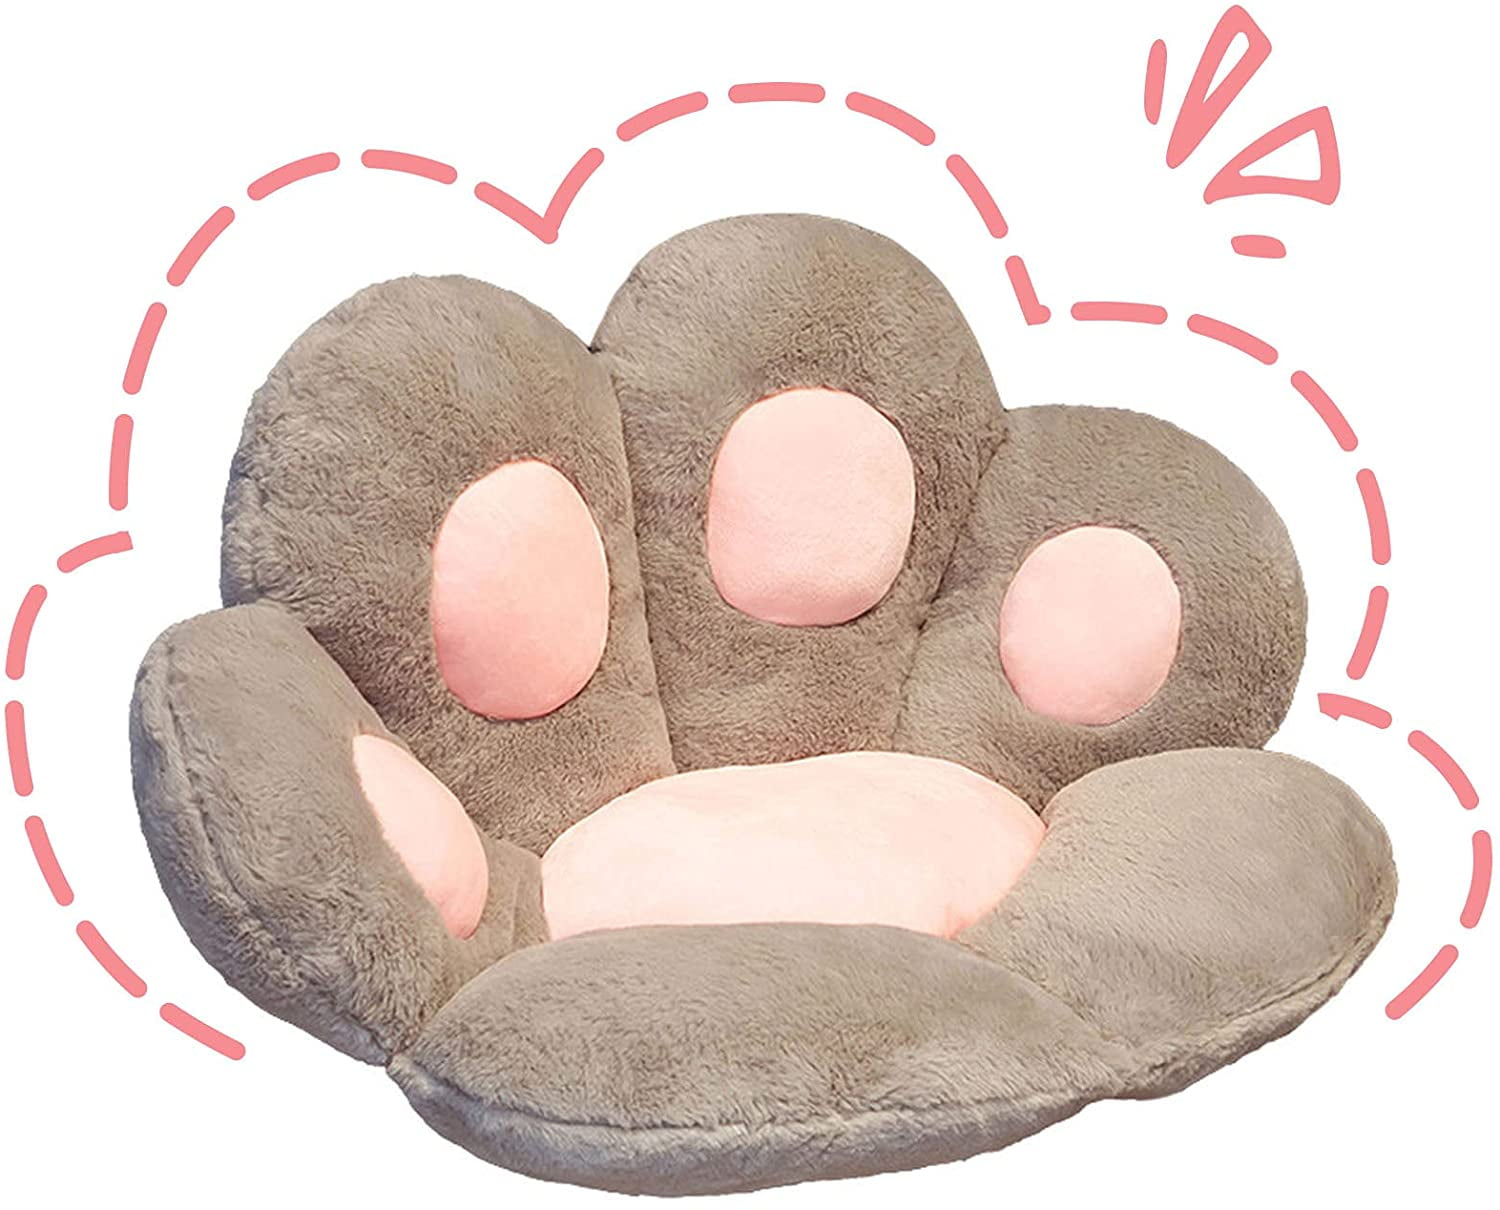 Deaboat Cat Paw Seat Cushion Chair Pads Cats Paw Shape Lazy Sofa Soft Chair Floor Cushions Cute Pillow Big Seat Pad Home Decor F